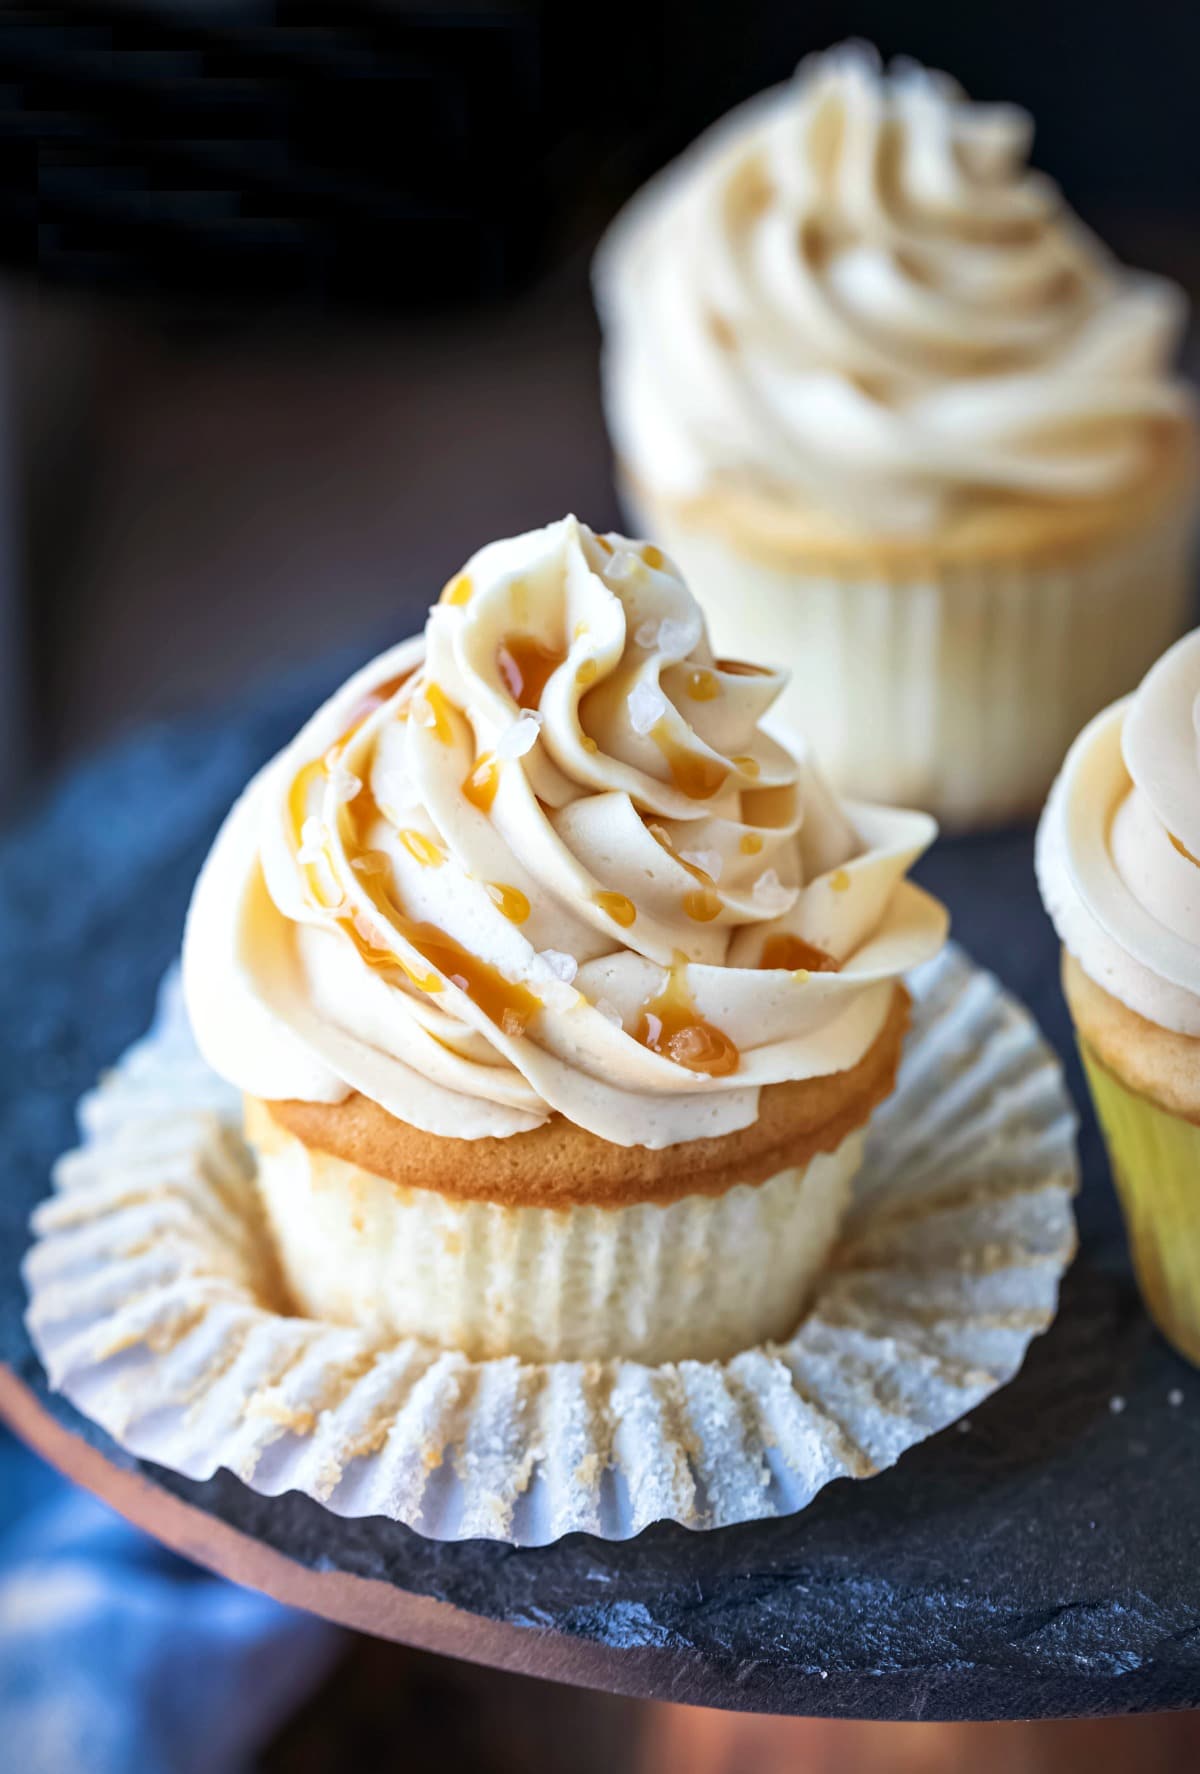 Vanilla cupcake topped with caramel frosting.